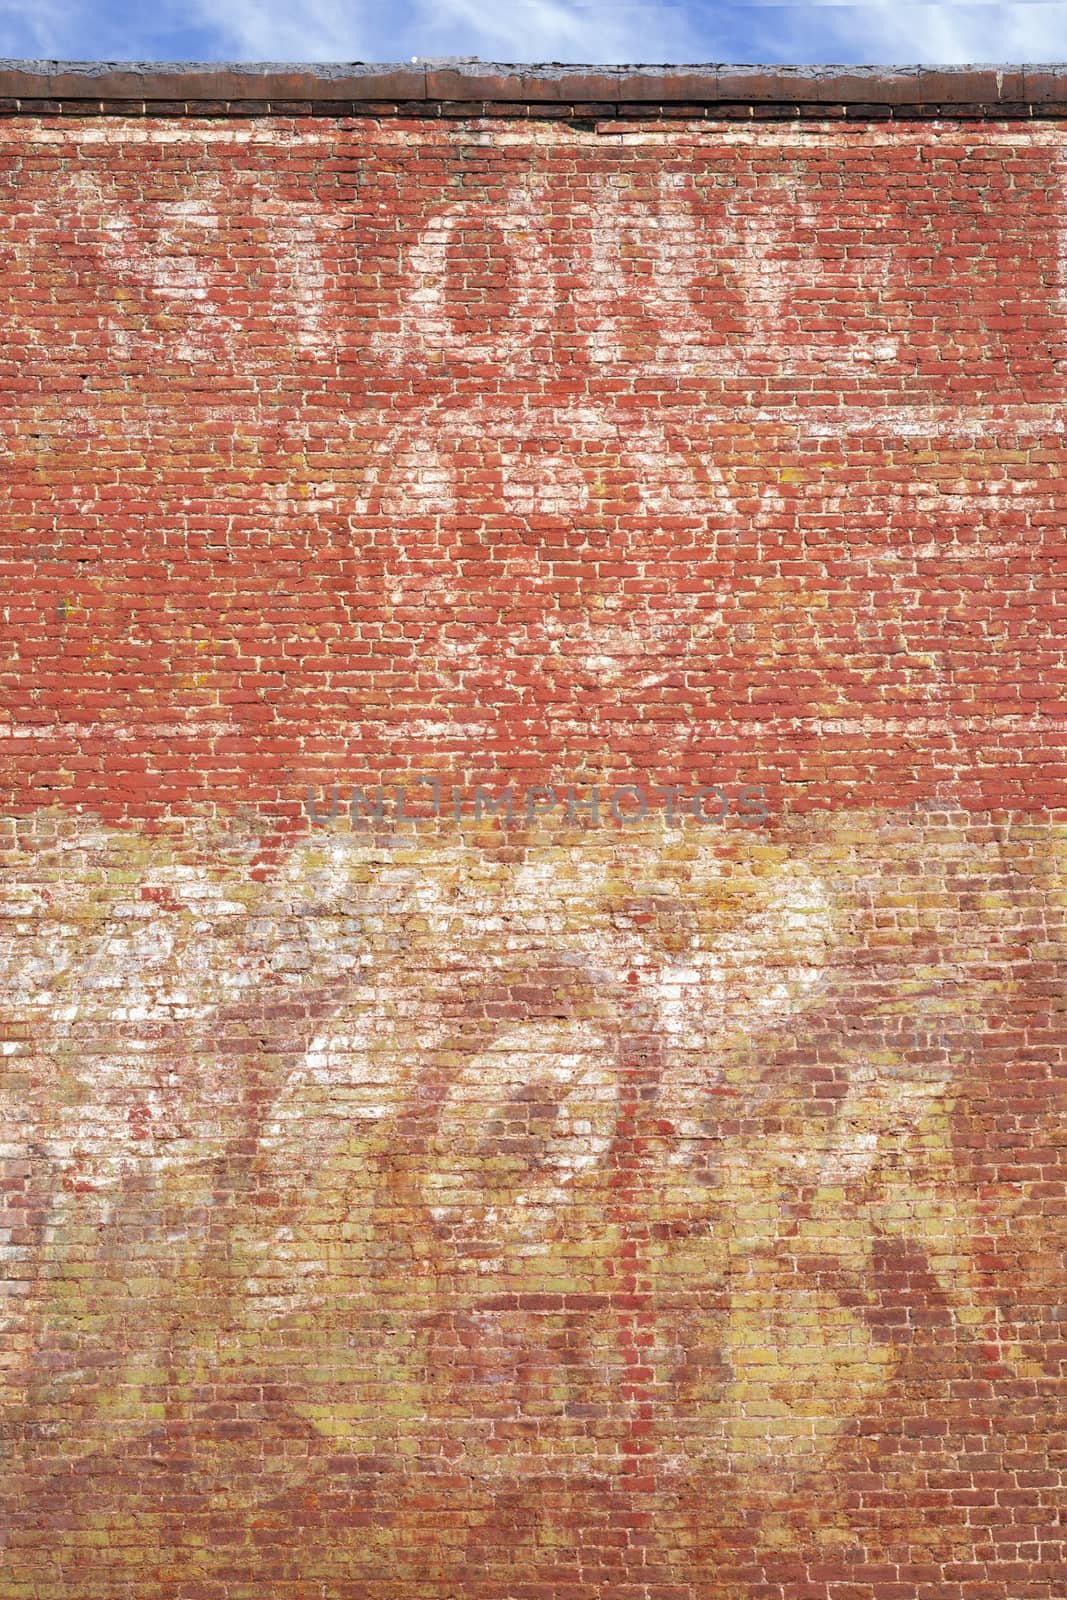 The faded paint of old advertising seen on the side of a brick building in a small town.